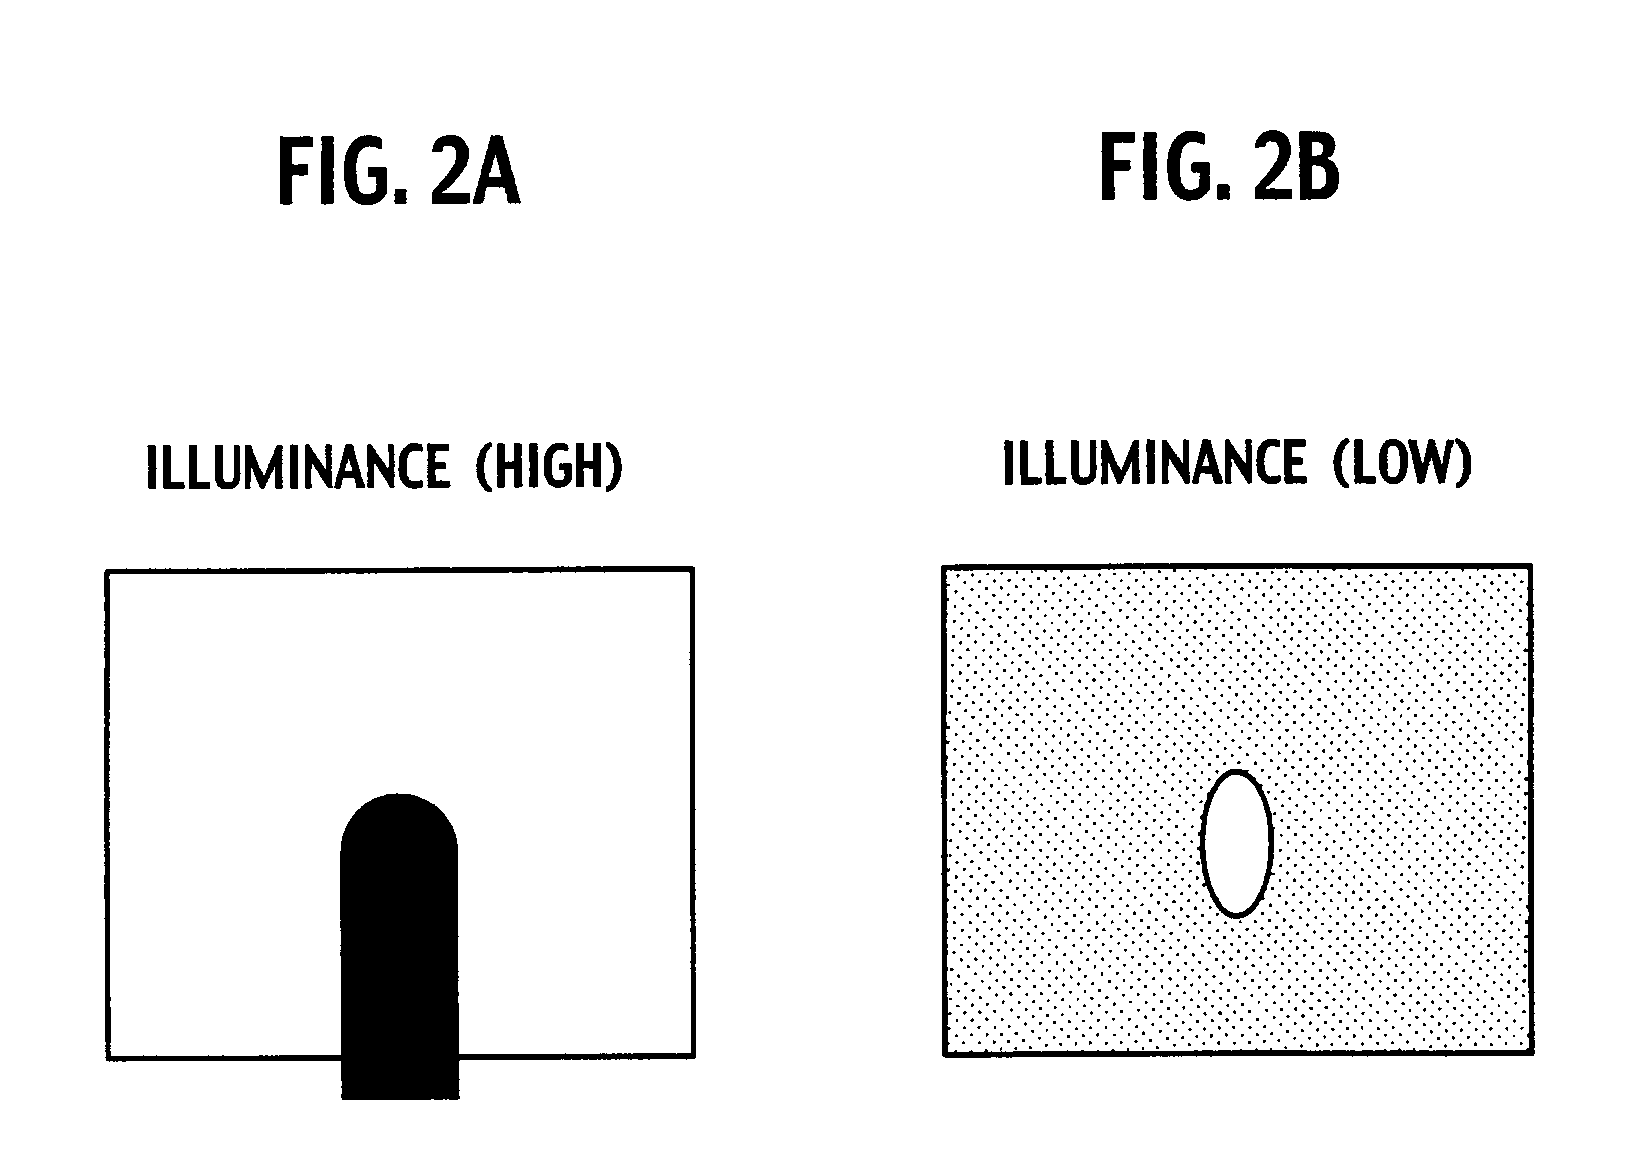 Liquid crystal display device achieving imaging with high s/n ratio using invisible light